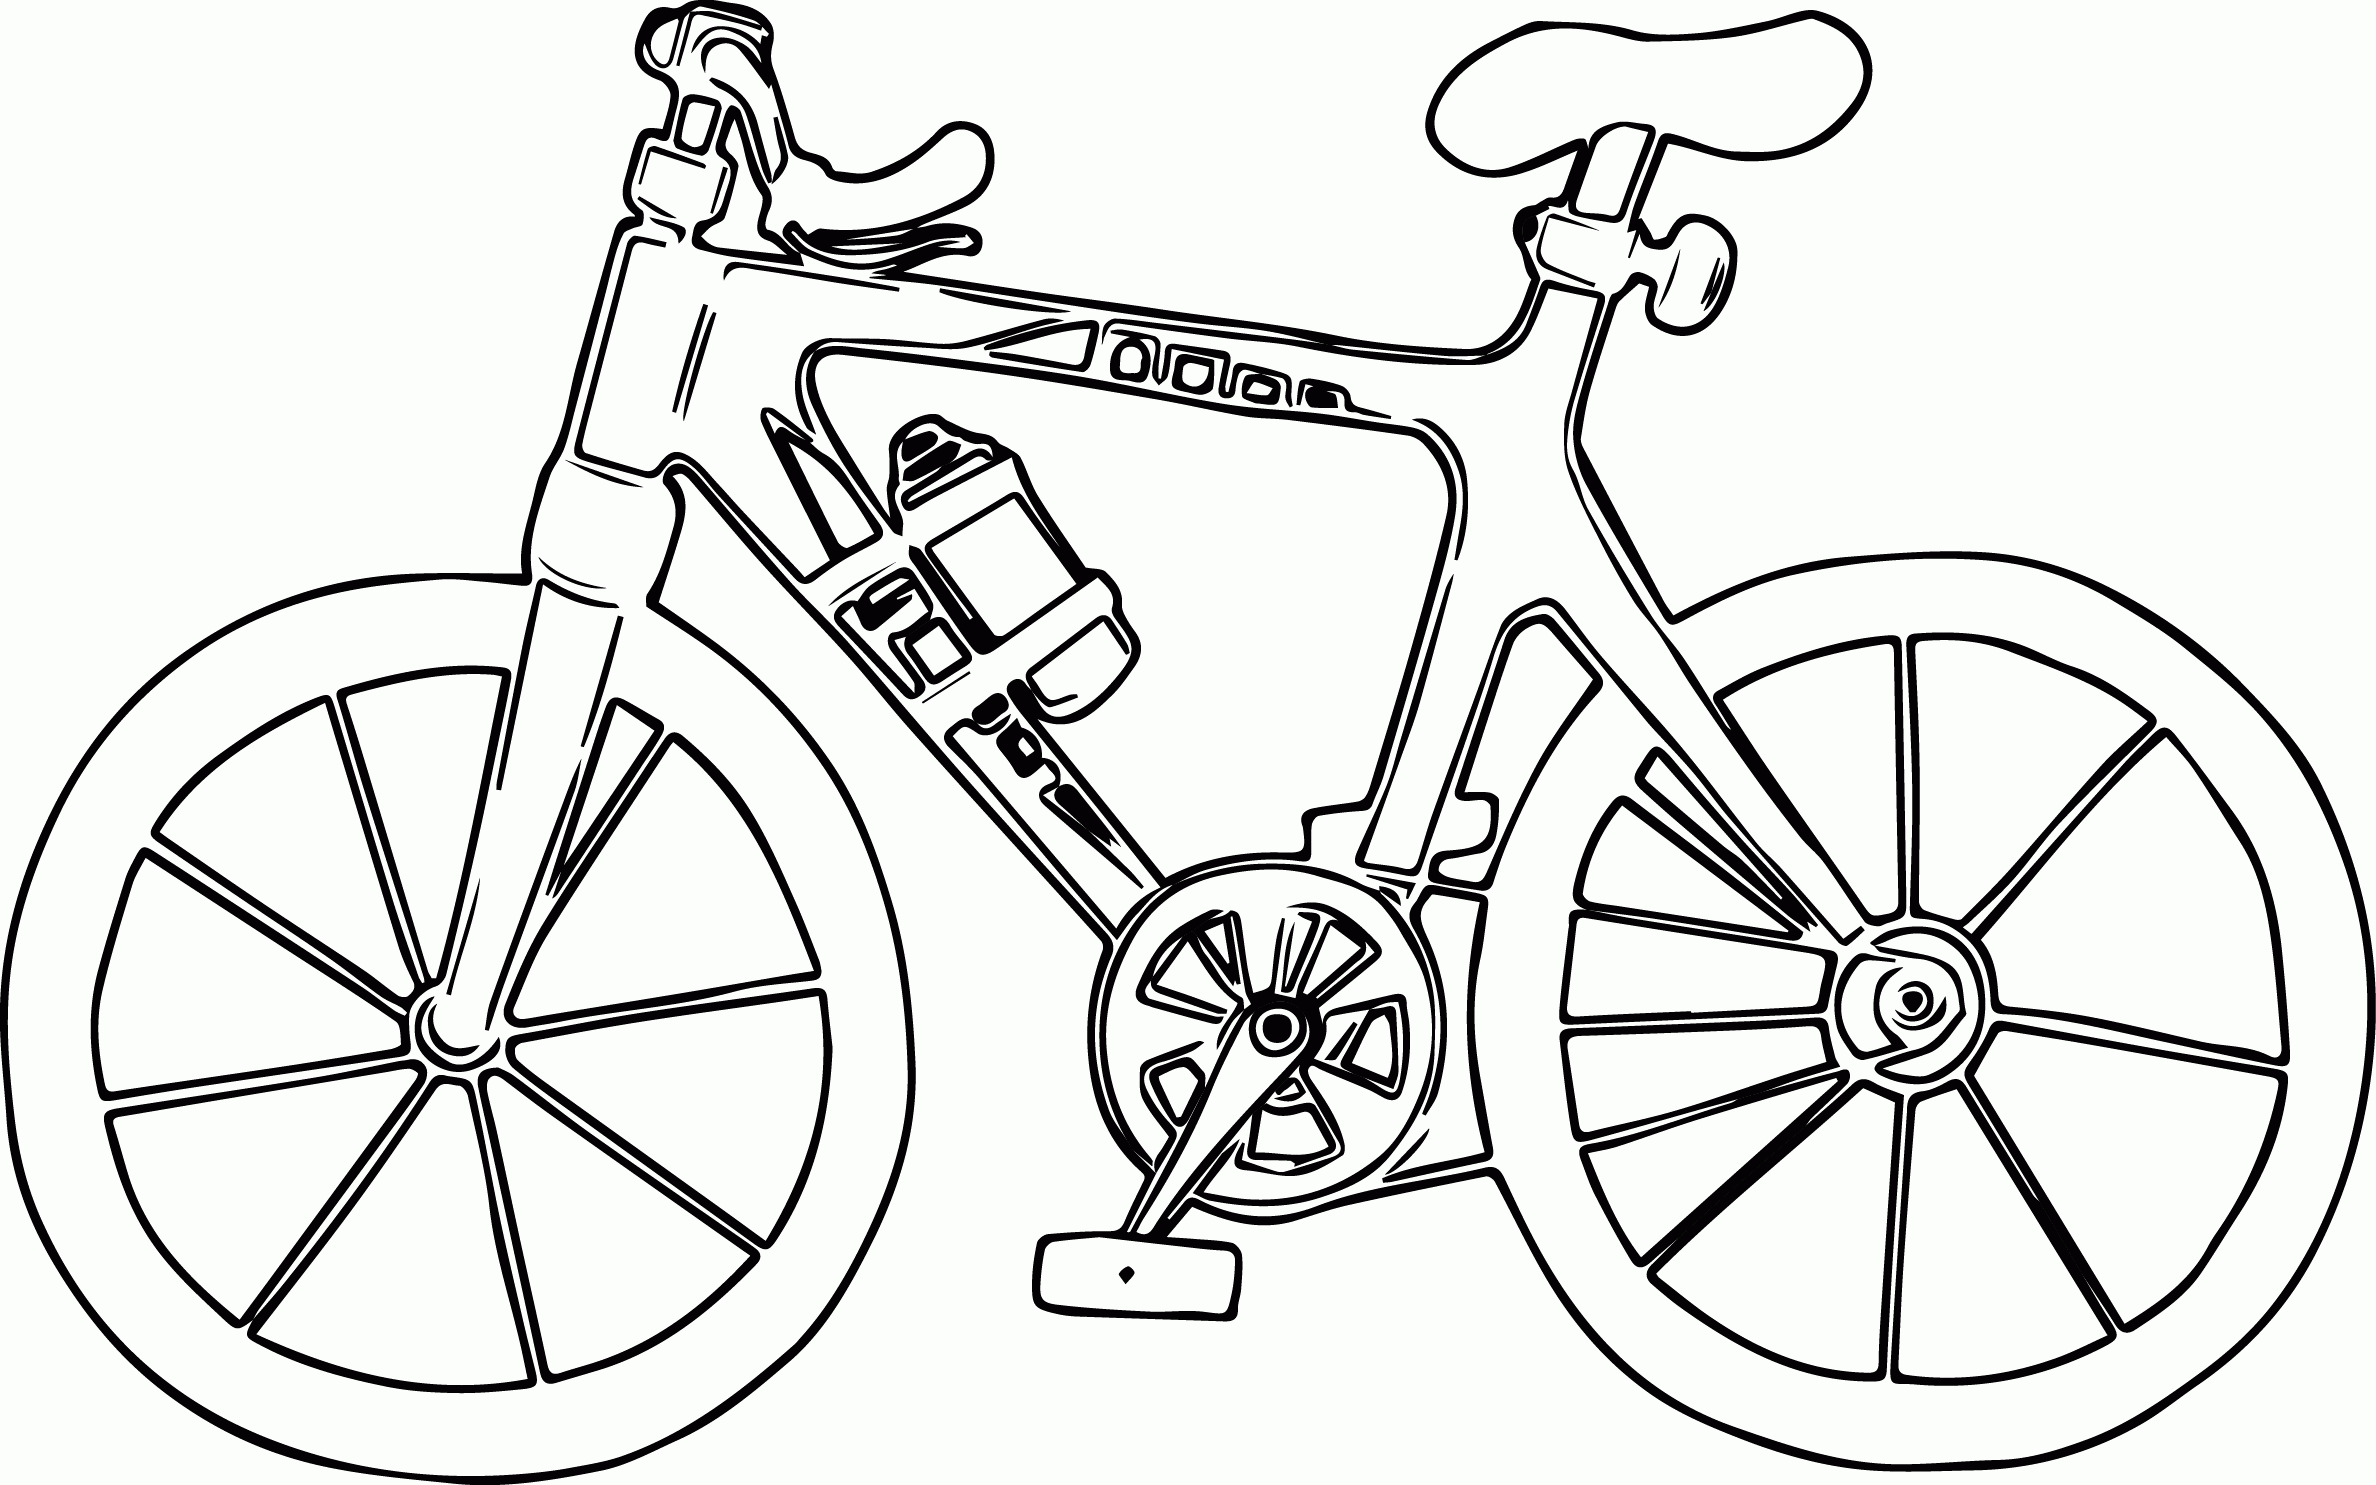 billion-tv-kids-bikes-coloring-pages-10-kids-coloring-pages-bicycle